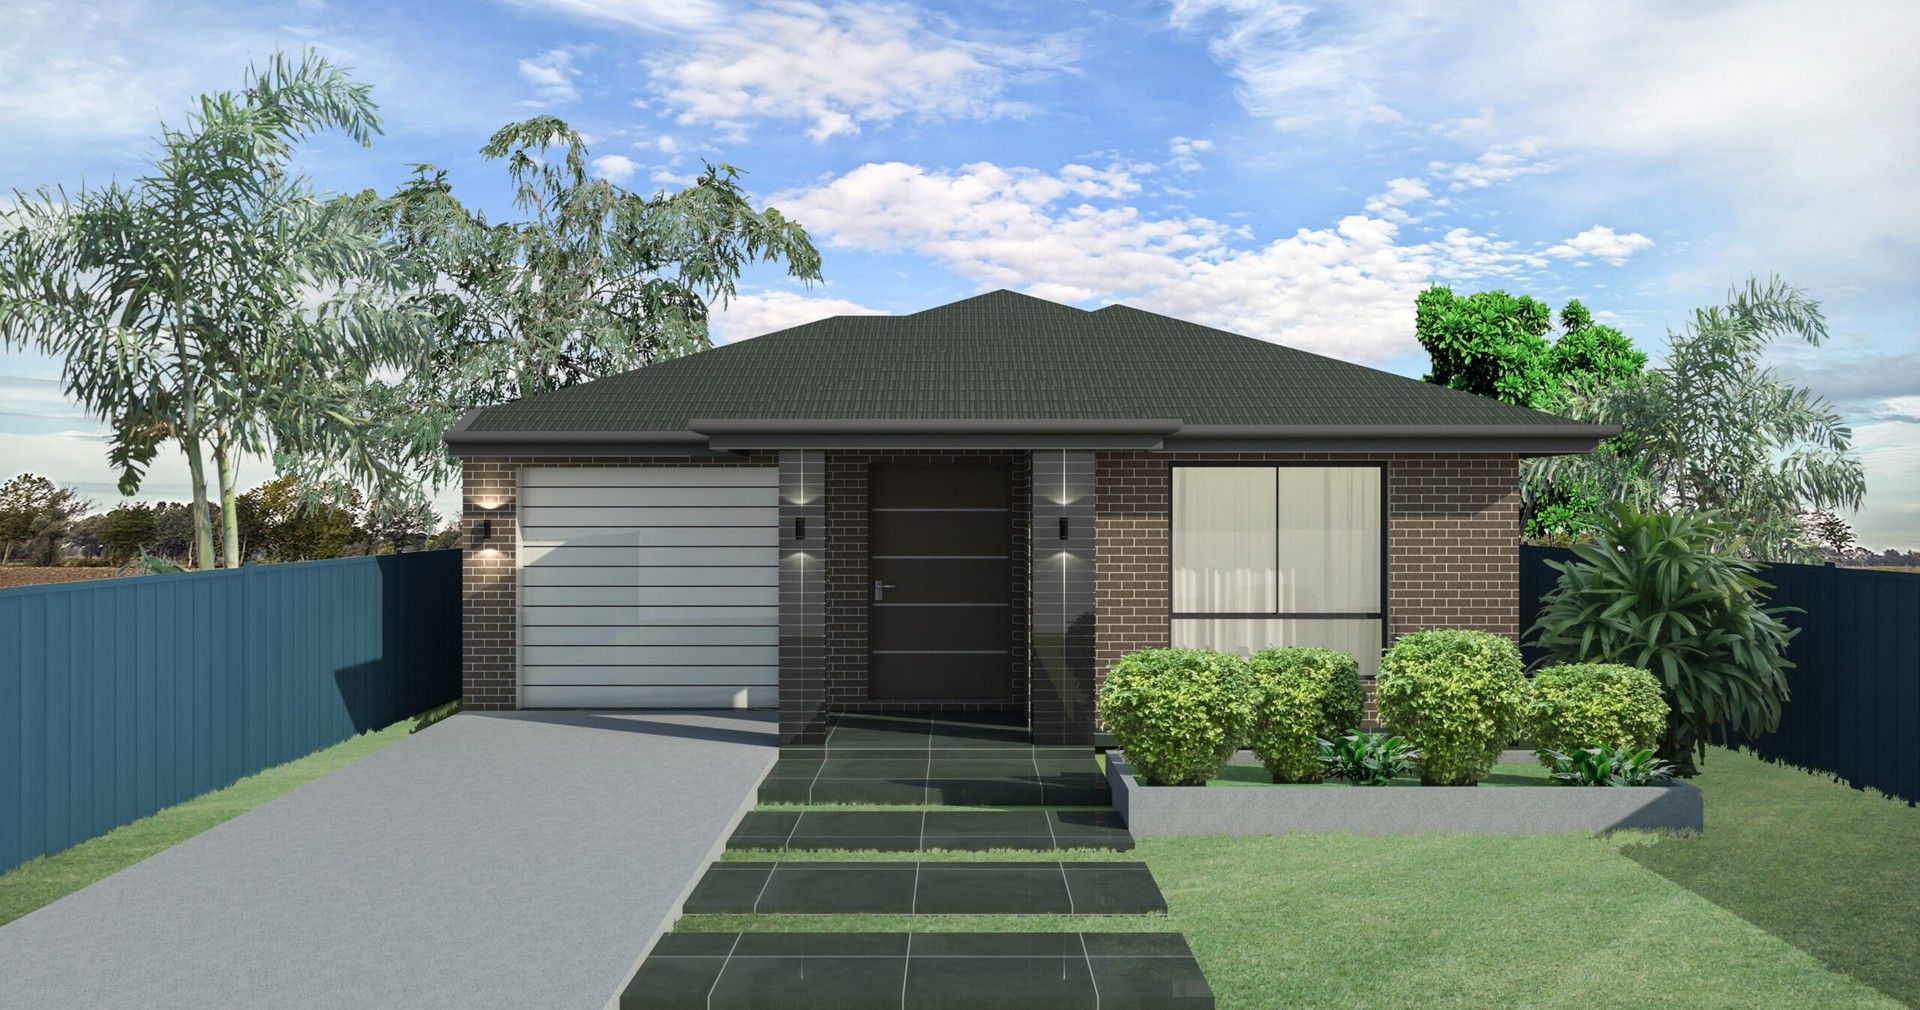 Lot 6 Twelfth Ave, Austral NSW 2179, Image 0